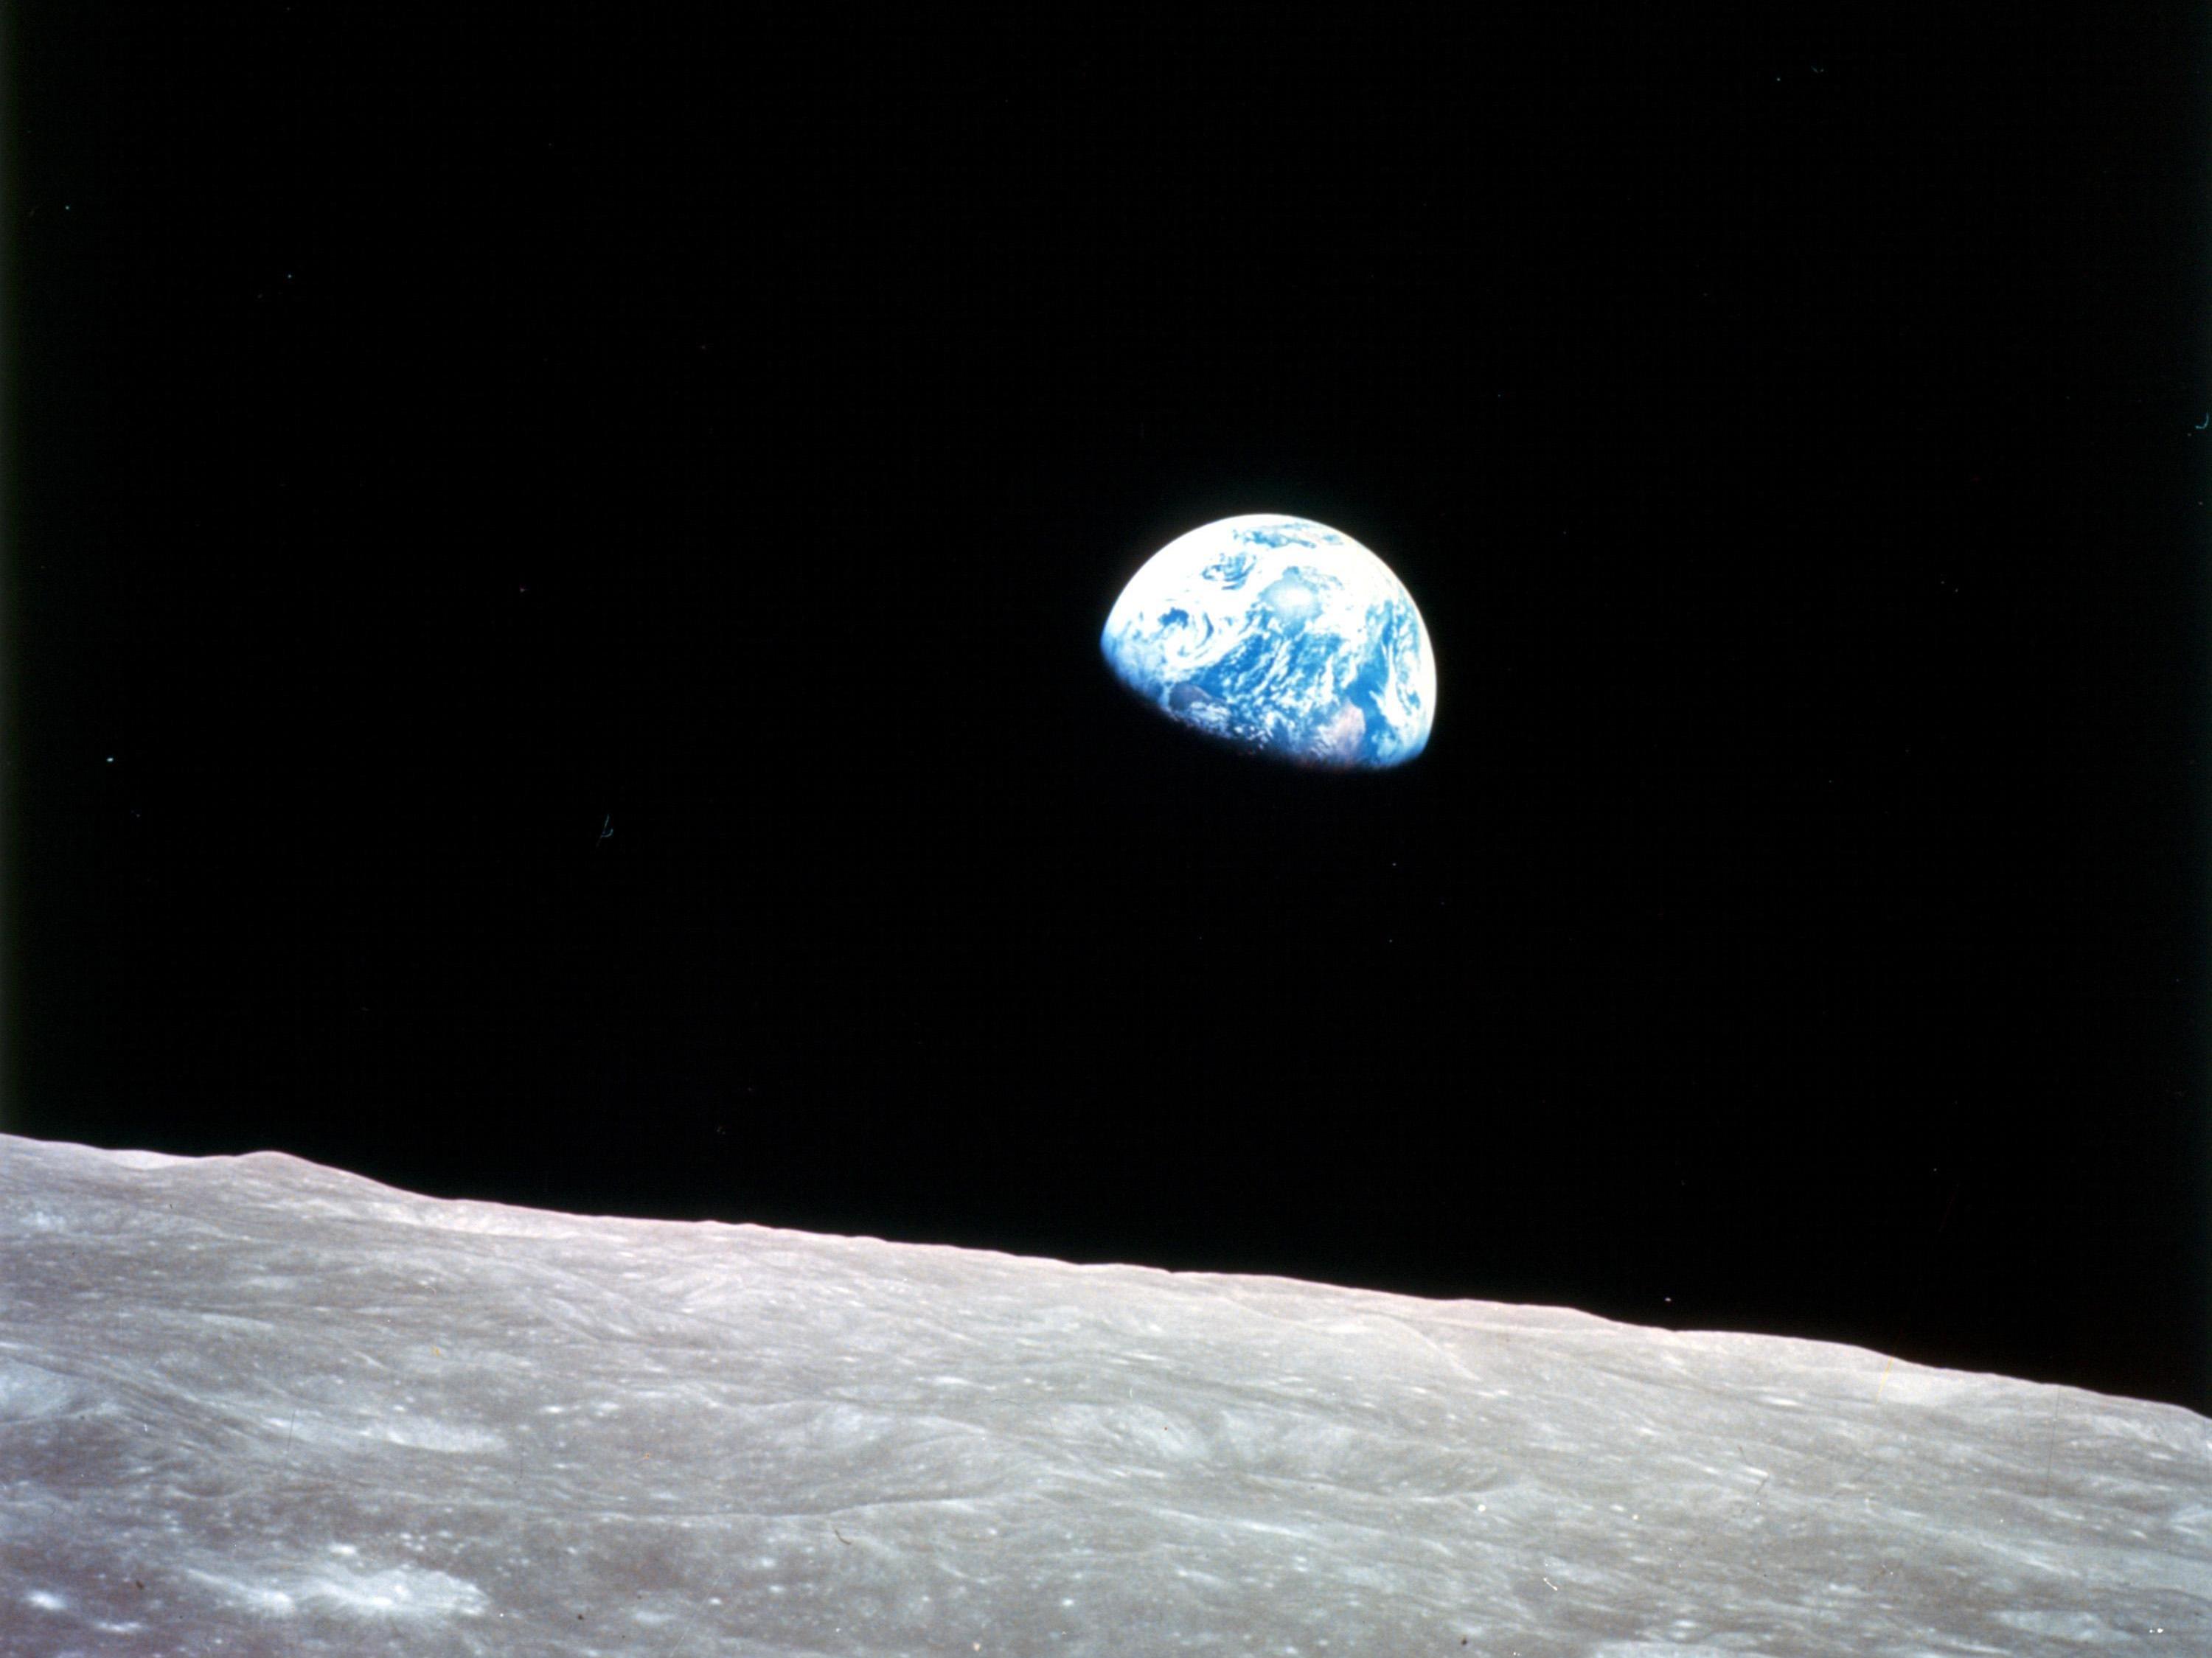  This picture, taken by Apollo 8 astronaut Bill Anders, is one of the most famous images ever photographed in space. It shows the earth rising against the barren lunar landscape on the first human mission to the moon in 1968.